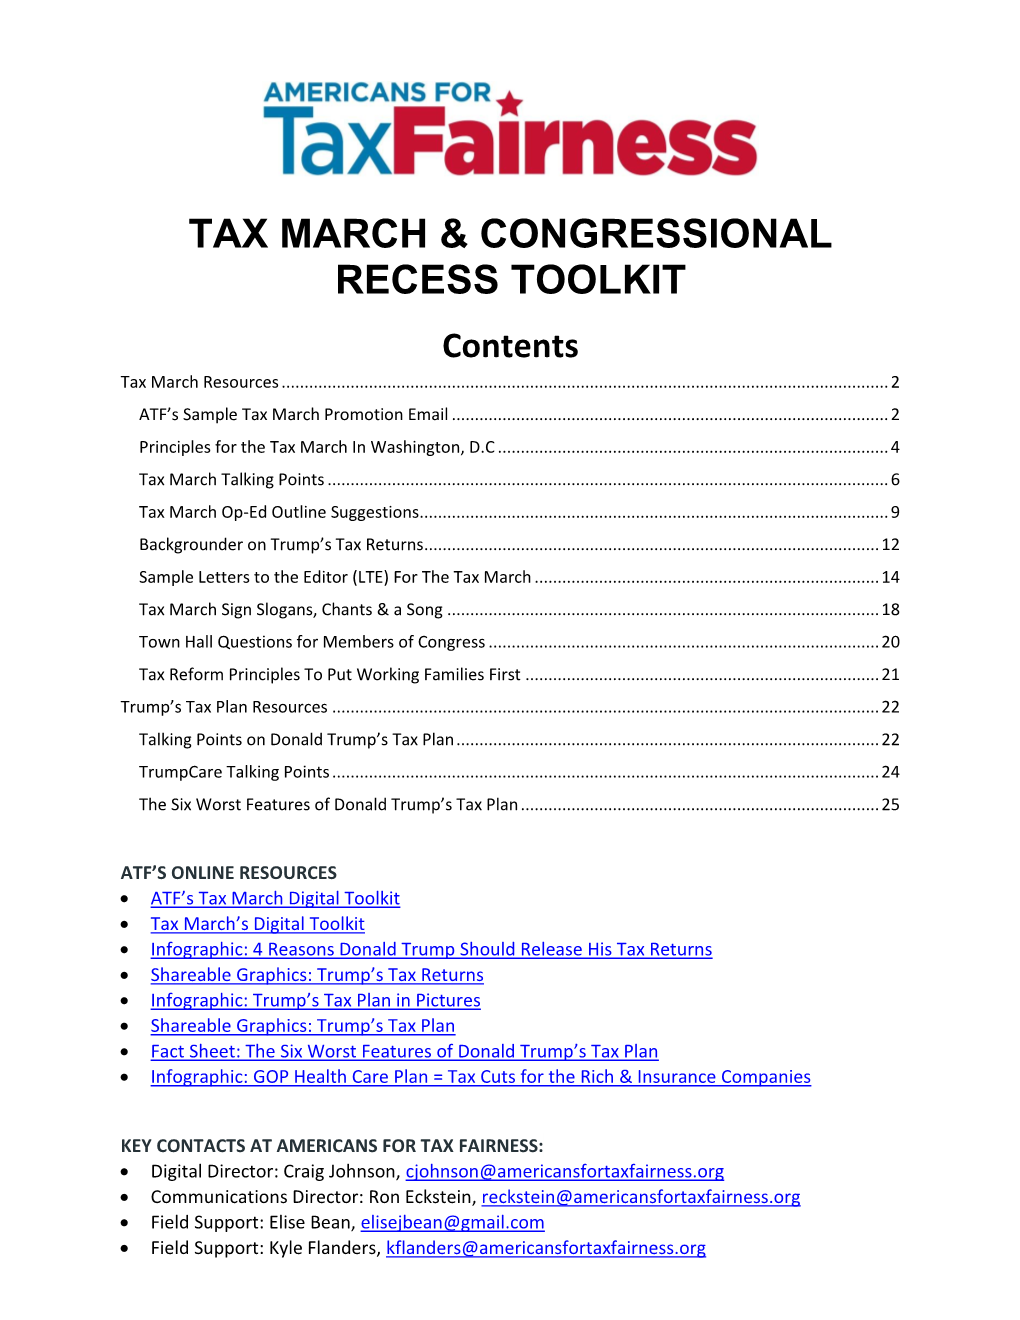 ATF Tax March & Congressional Recess Toolkit